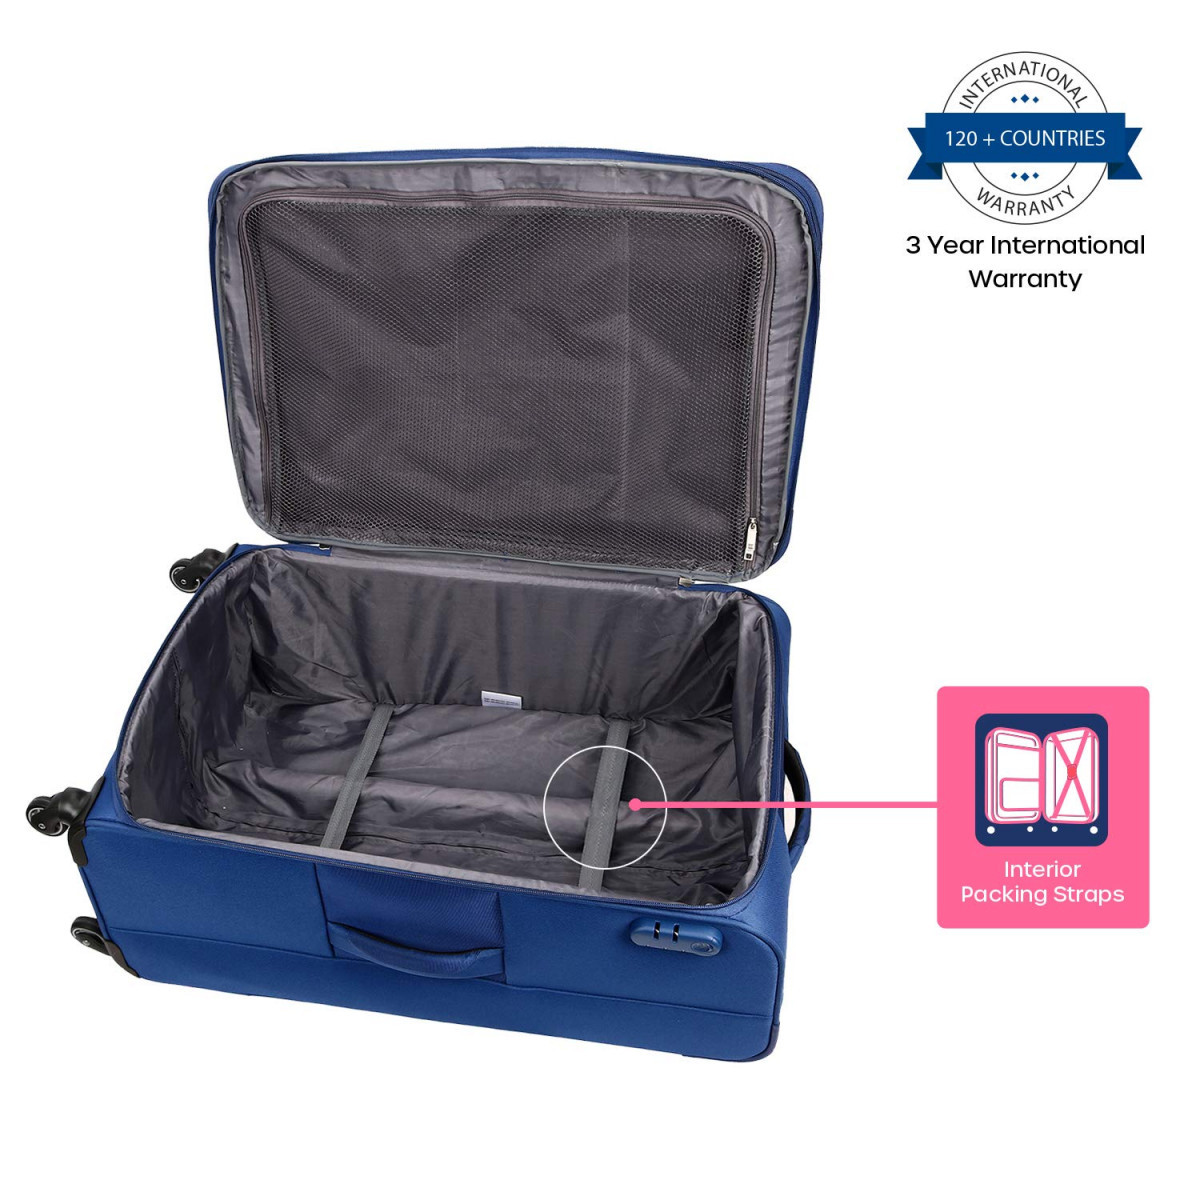 American Tourister Geneva 56 Cms Small Cabin Polyester Soft Sided 4 Spinner Wheels LuggageSuitcaseTrolley Bag Blue